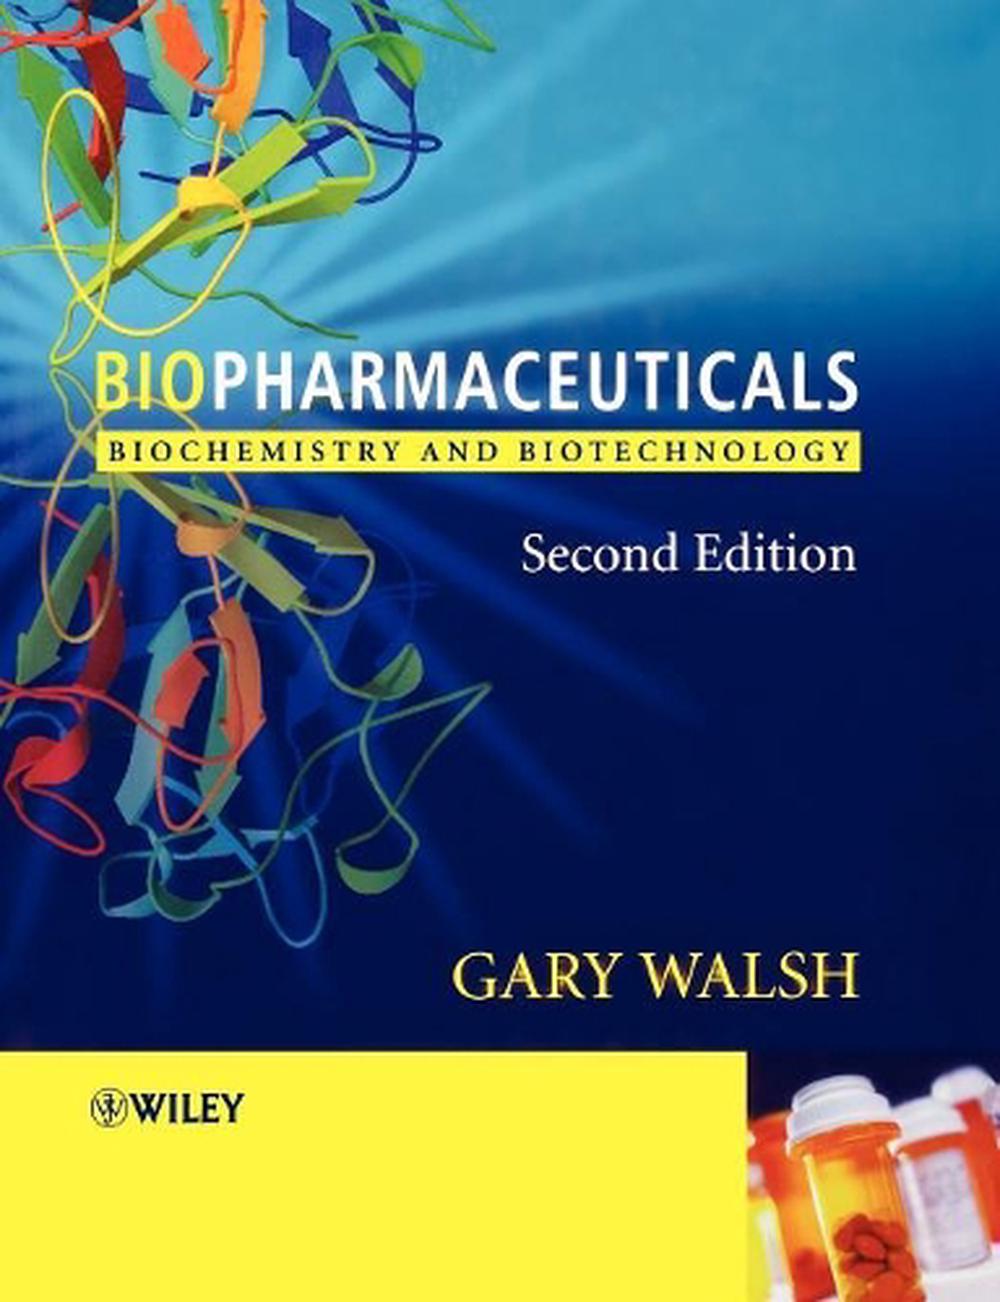 Biopharmaceuticals Biochemistry and Biotechnology, 2nd Edition by Gary